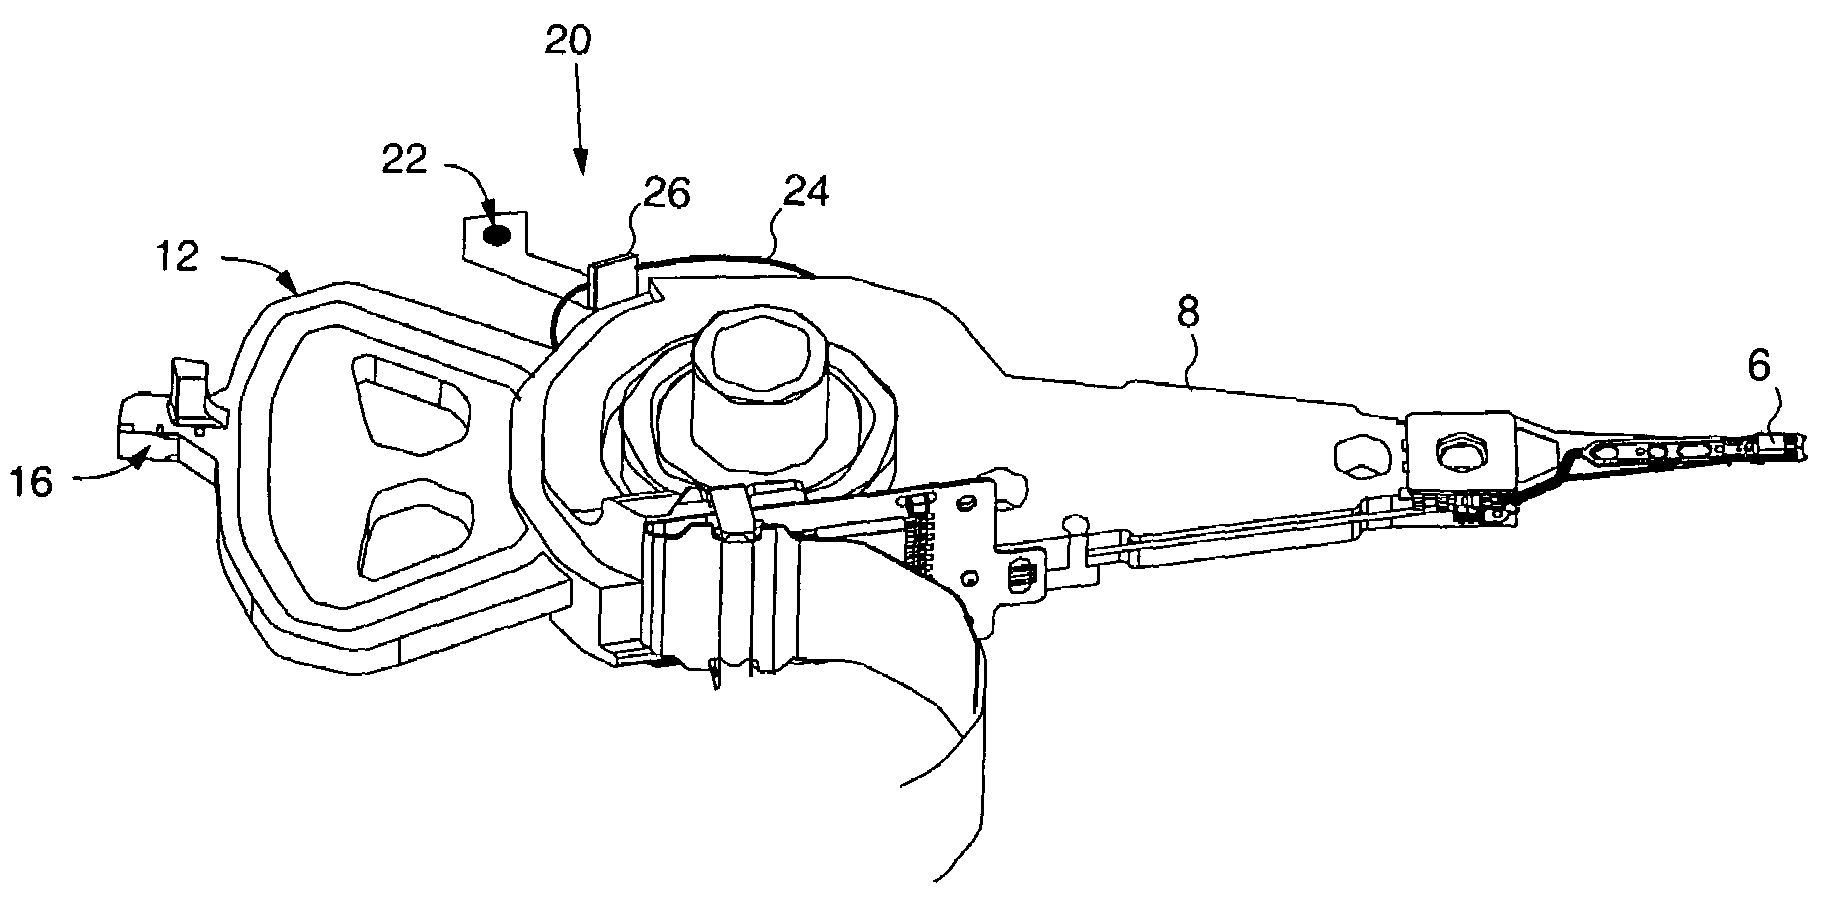 Disk drive using an optical sensor to detect a position of an actuator arm